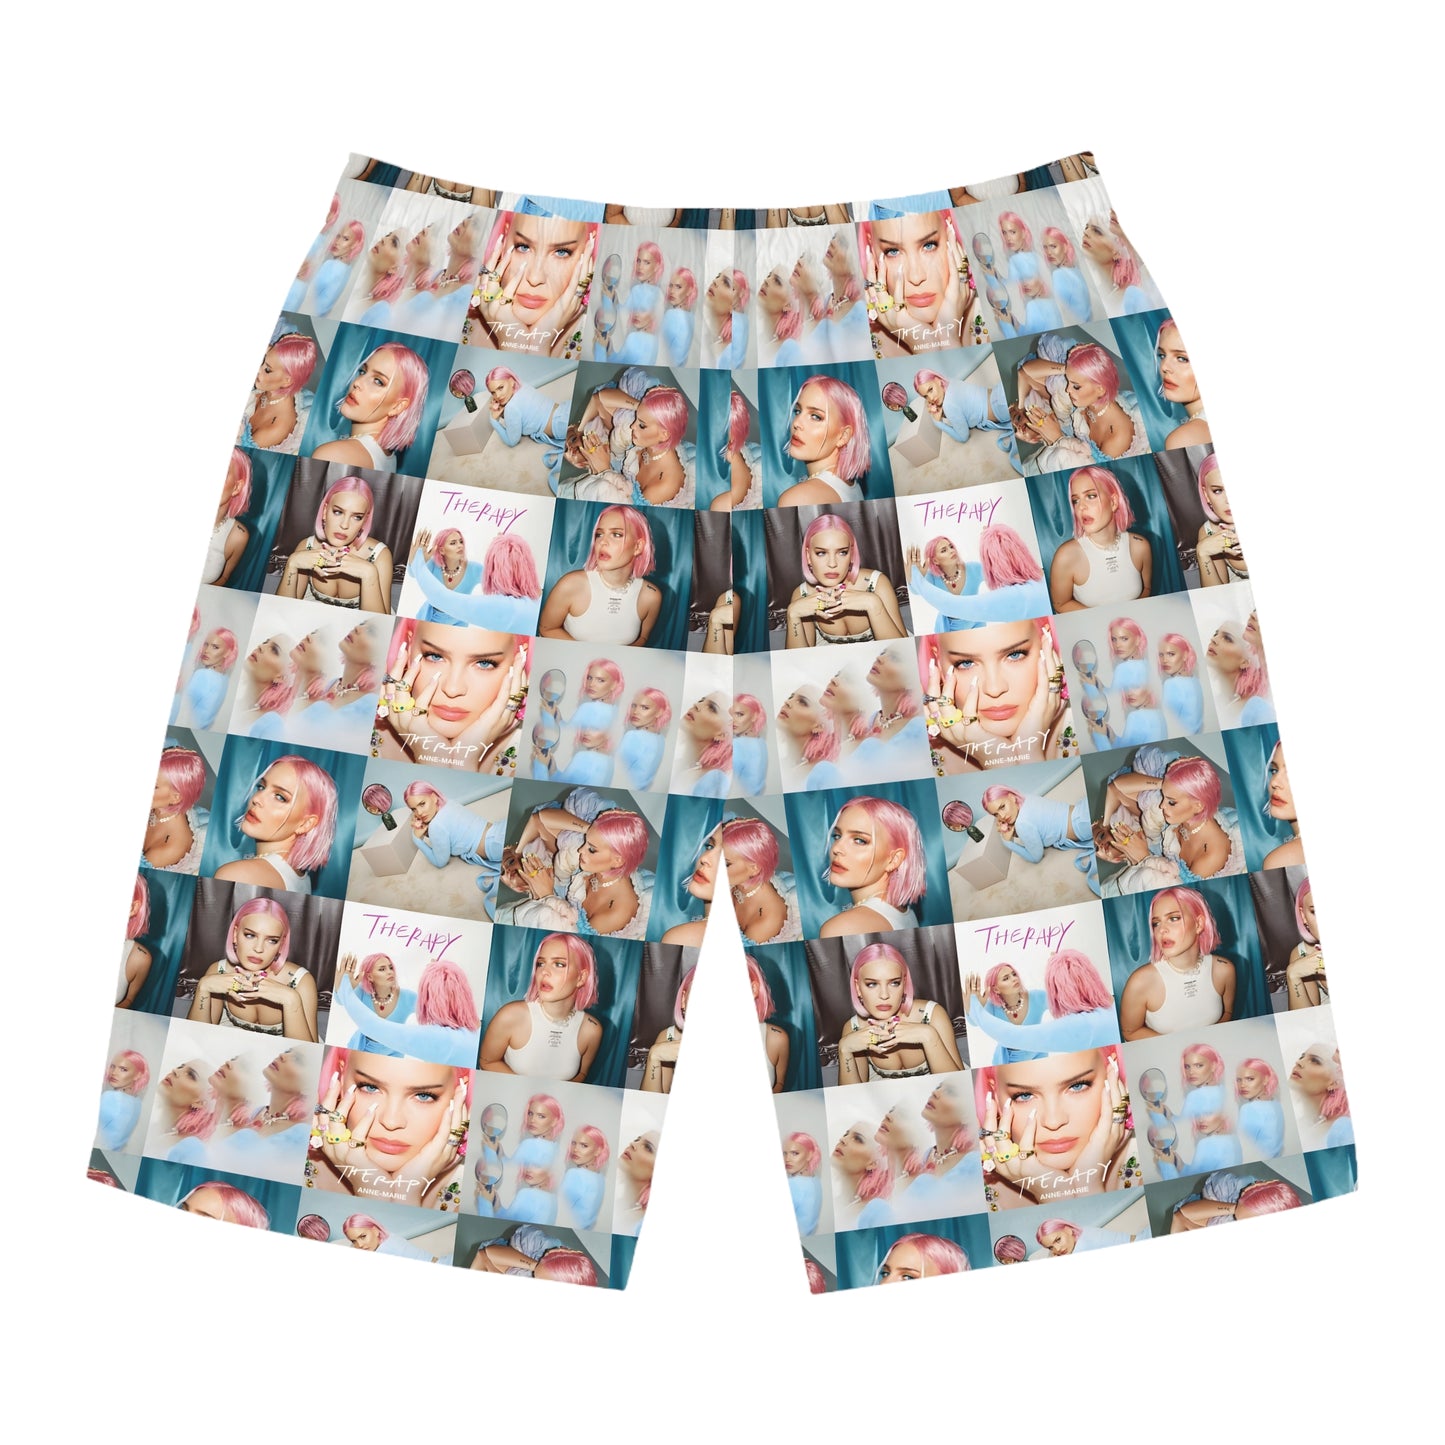 Anne Marie Therapy Mosaic Men's Board Shorts